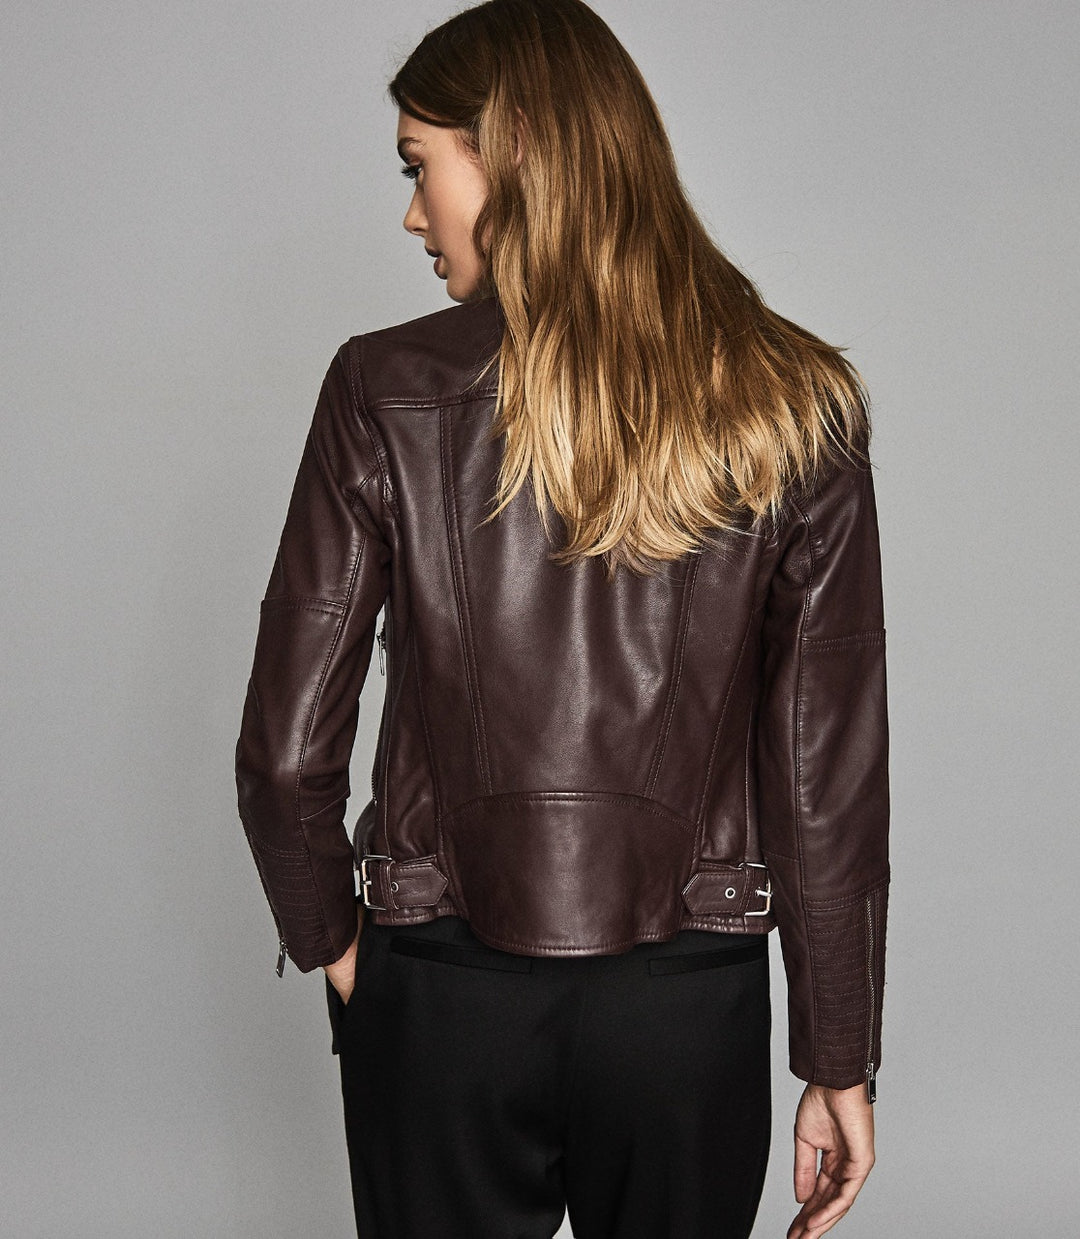 Women's Cafe Brown Leather Jacket-Genuine Sheep Leather Jacket Women-Woman Leather Jacket-Leather Jacket Woman-Christmas Day Gift-Gift For Her